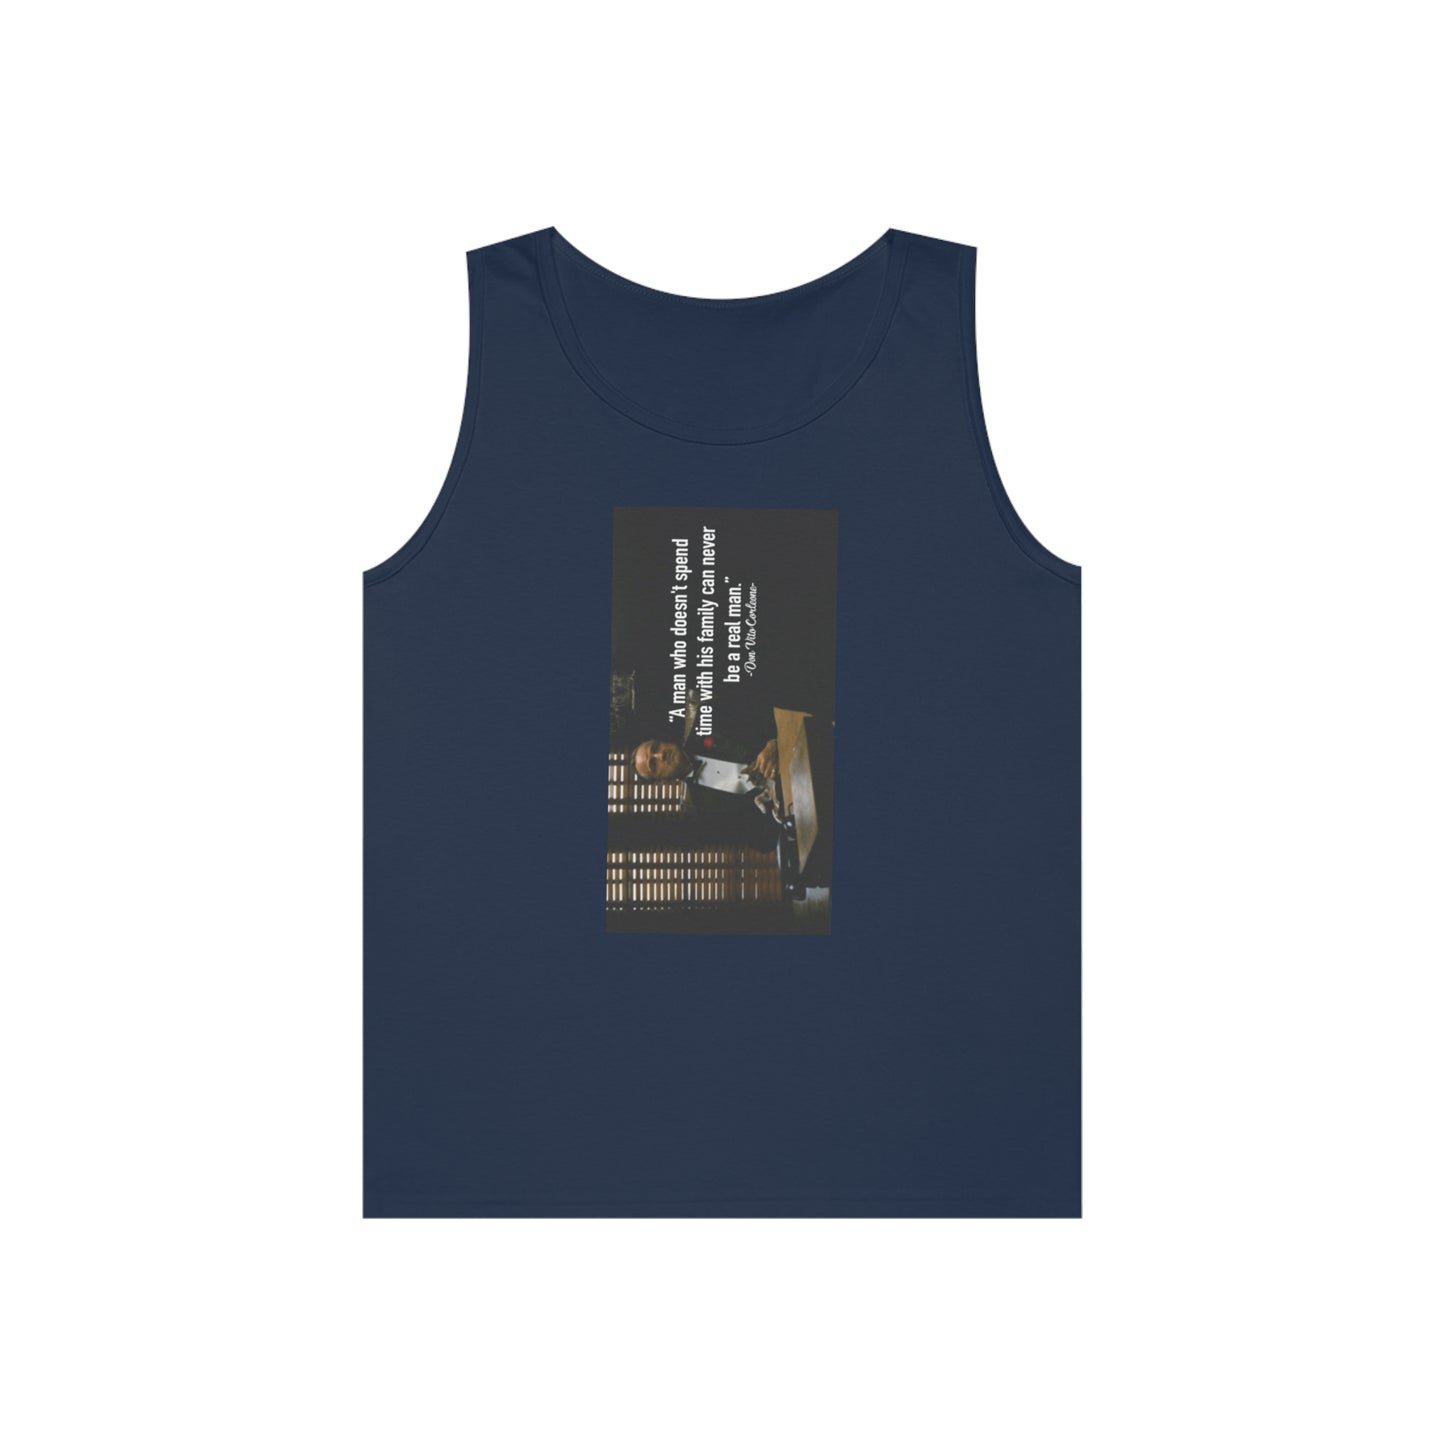 The Godfather Unisex Heavy Cotton Tank Top